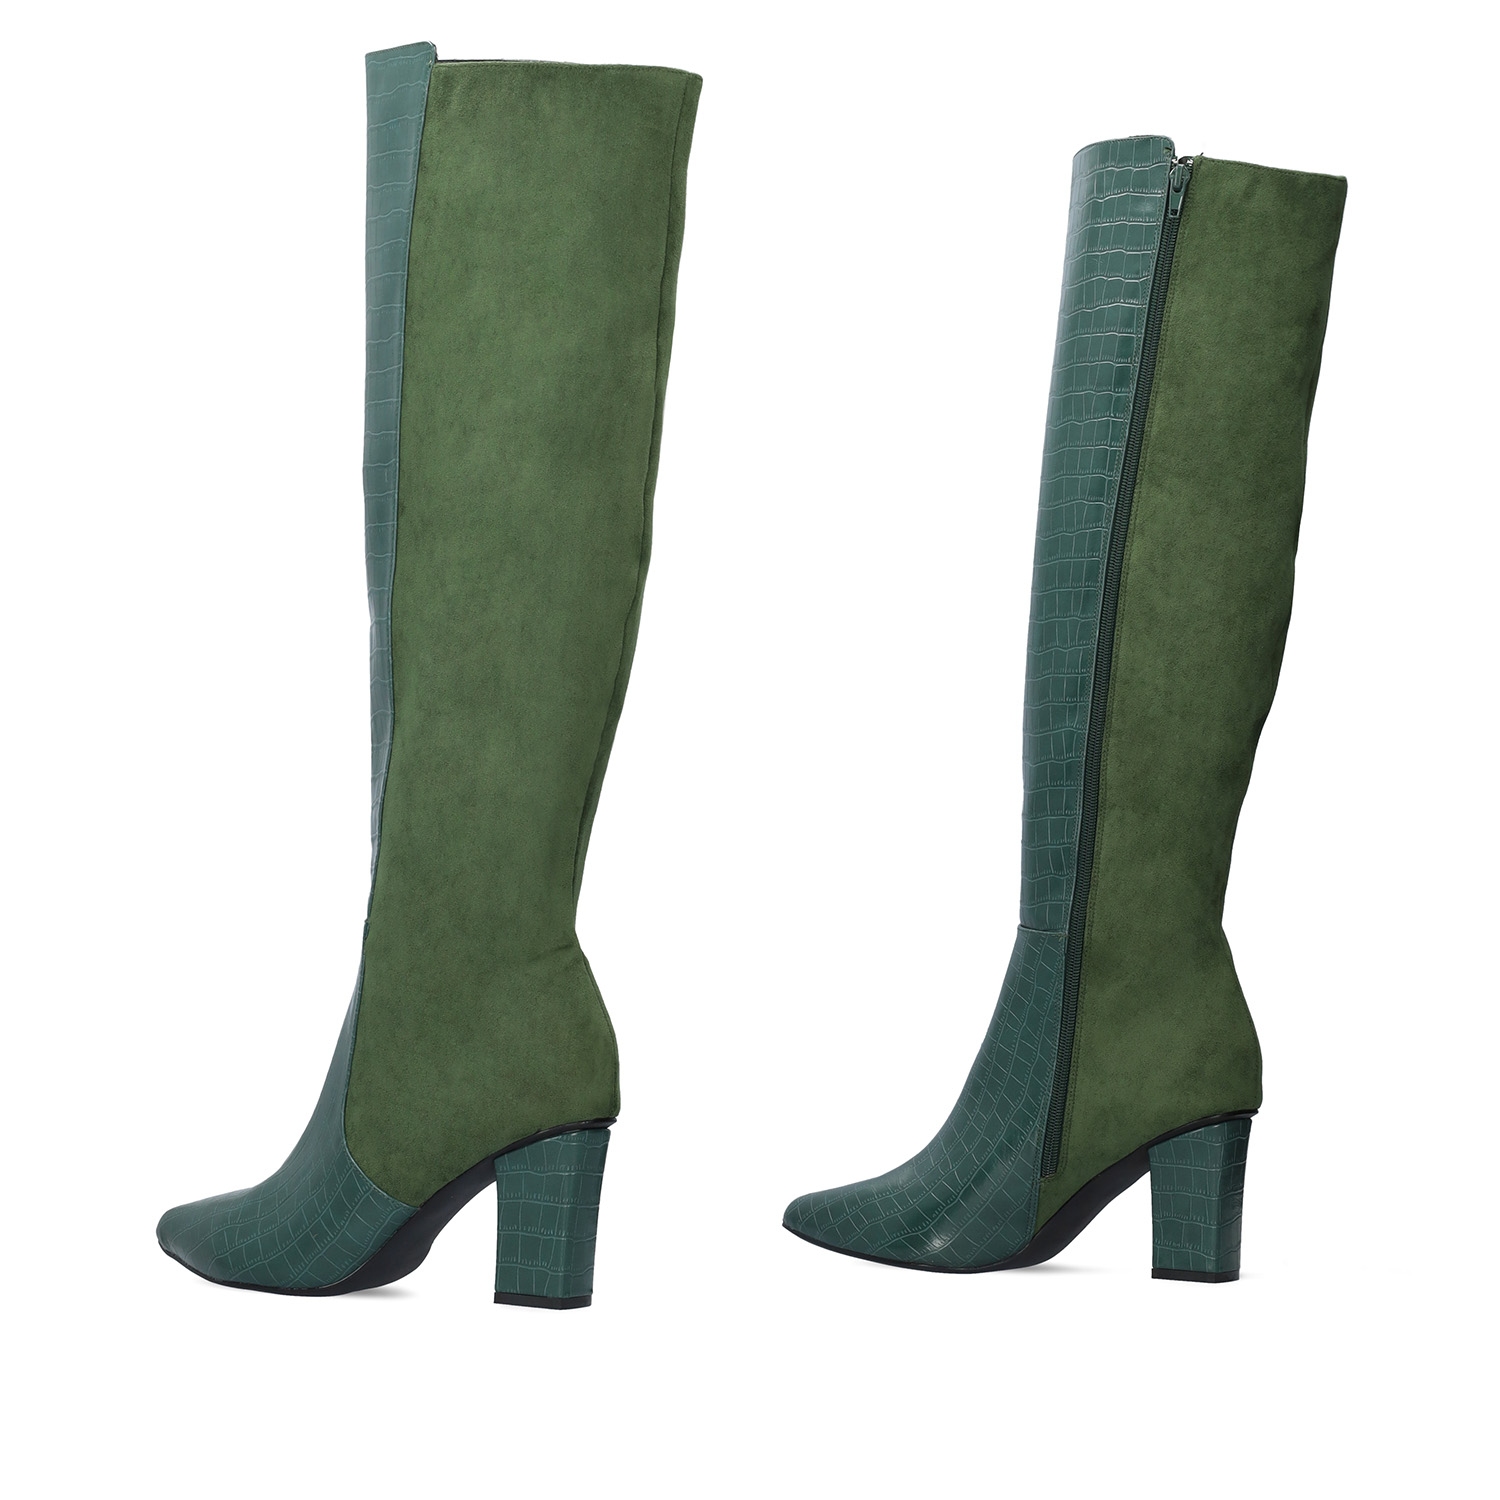 Heeled knee-high boots combined green faux croc leather with faux suede. 